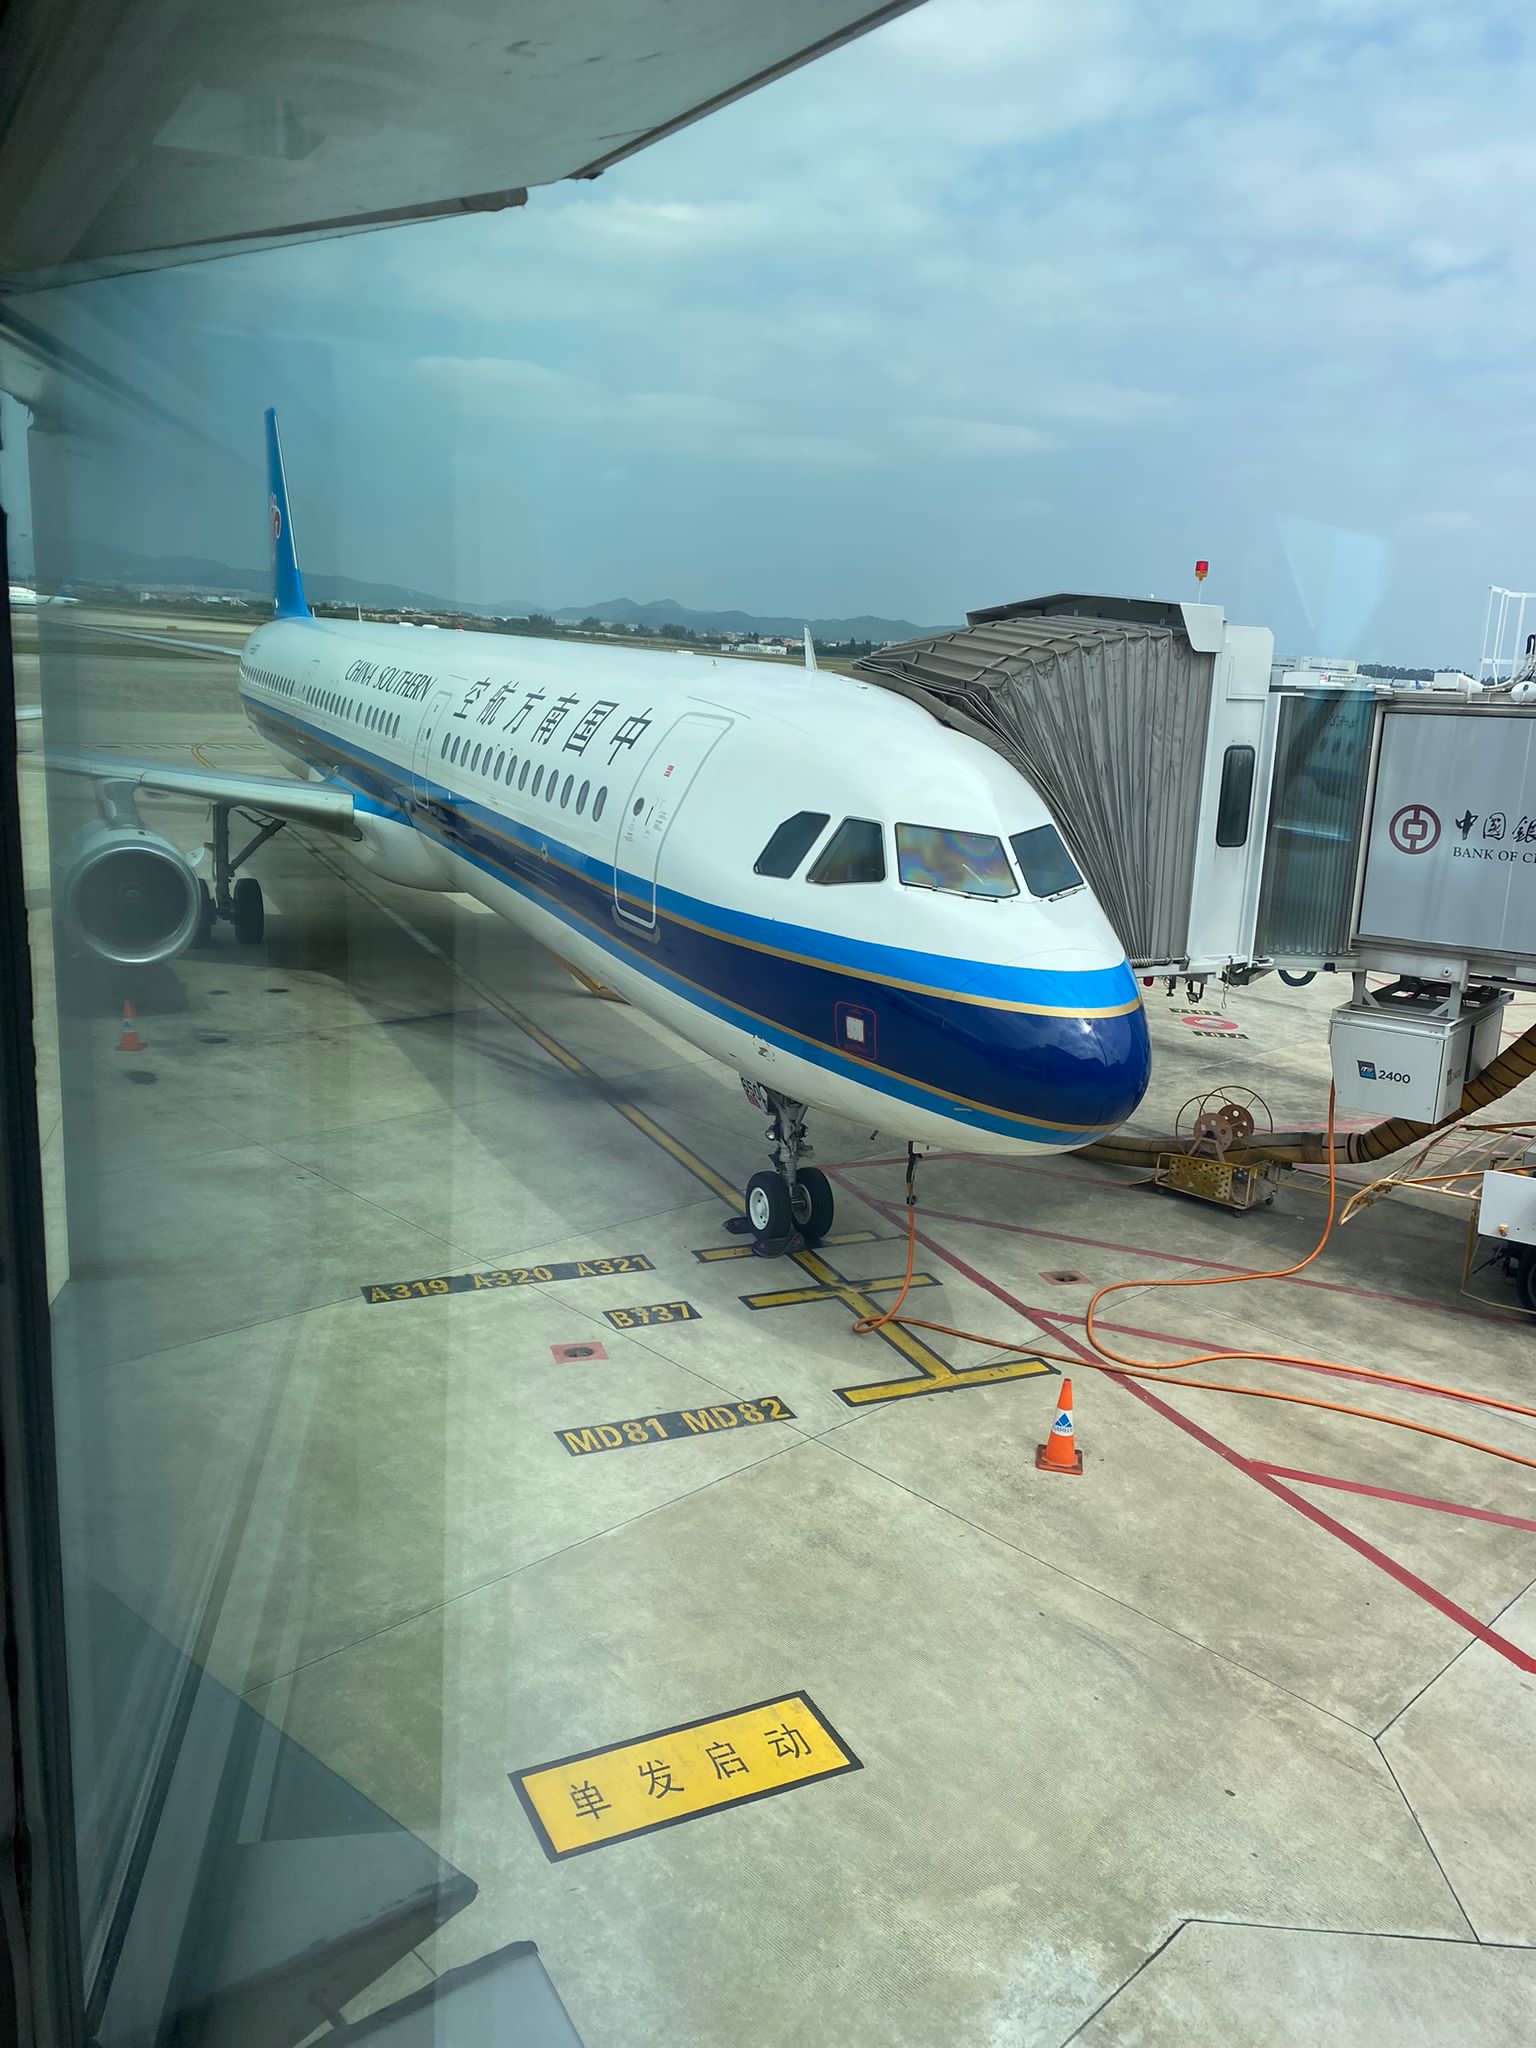 China Southern Airlines - Airbus A320